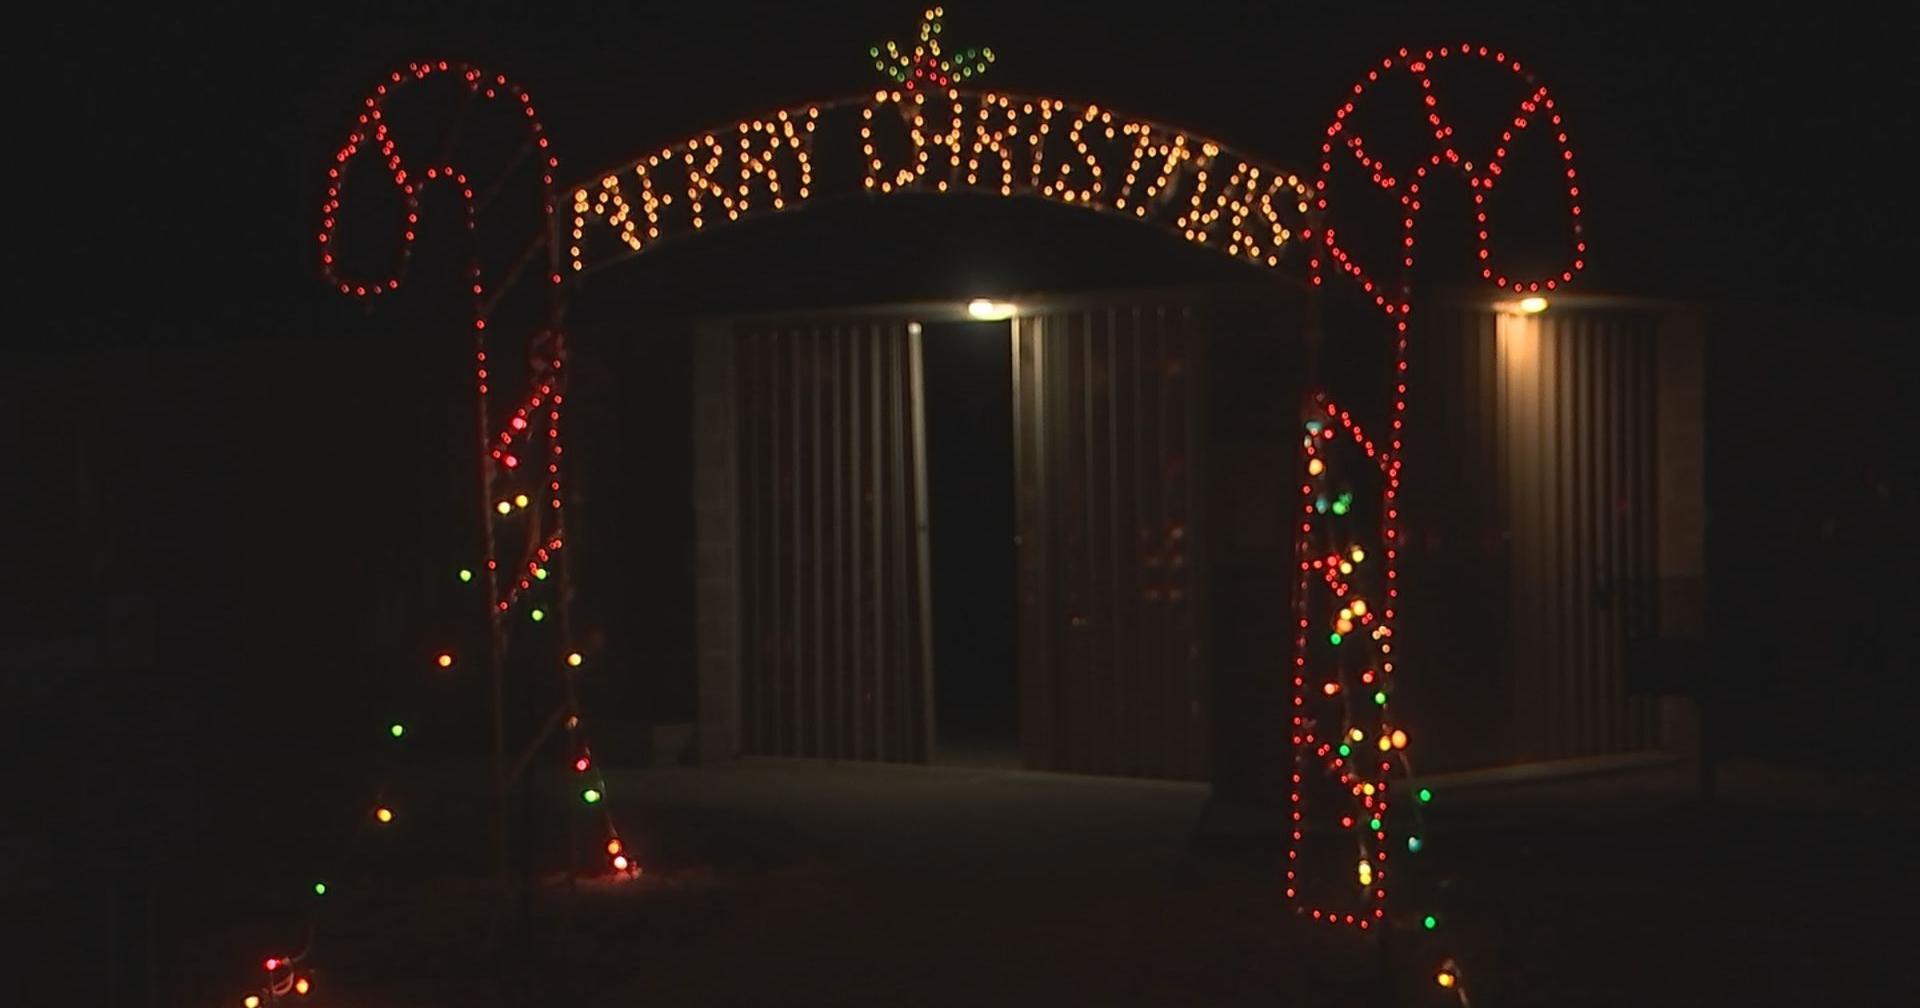 Mike Miller Park's Christmas in Park begins, bringing beautiful lights to support good causes